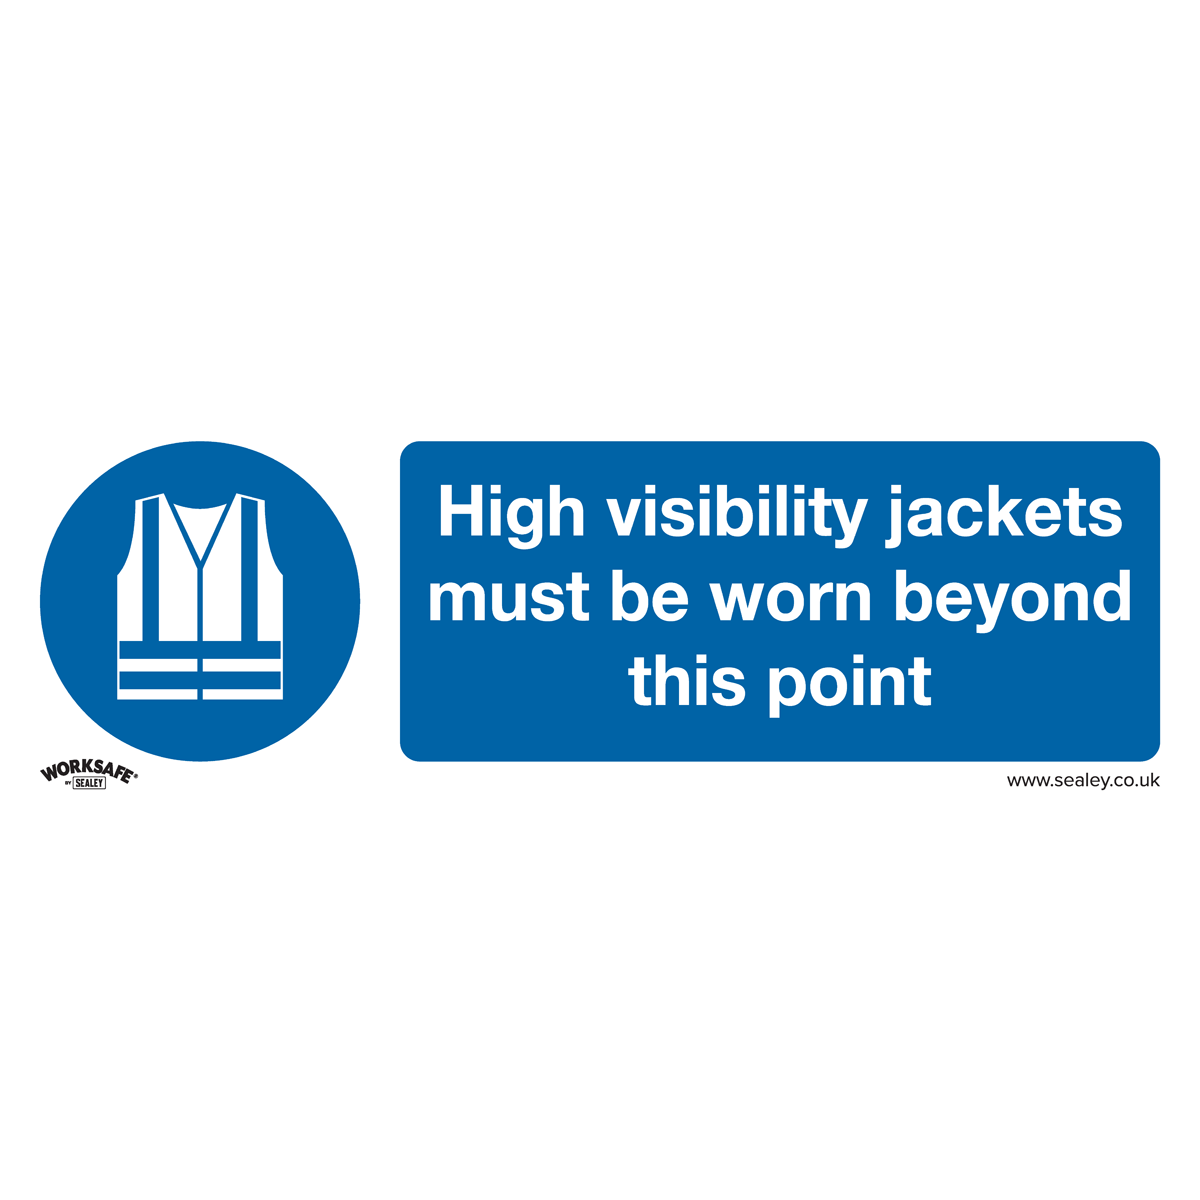 Mandatory Safety Sign - High Visibility Jackets Must Be Worn Beyond This Point - Rigid Plastic - Pack of 10 - SS9P10 - Farming Parts